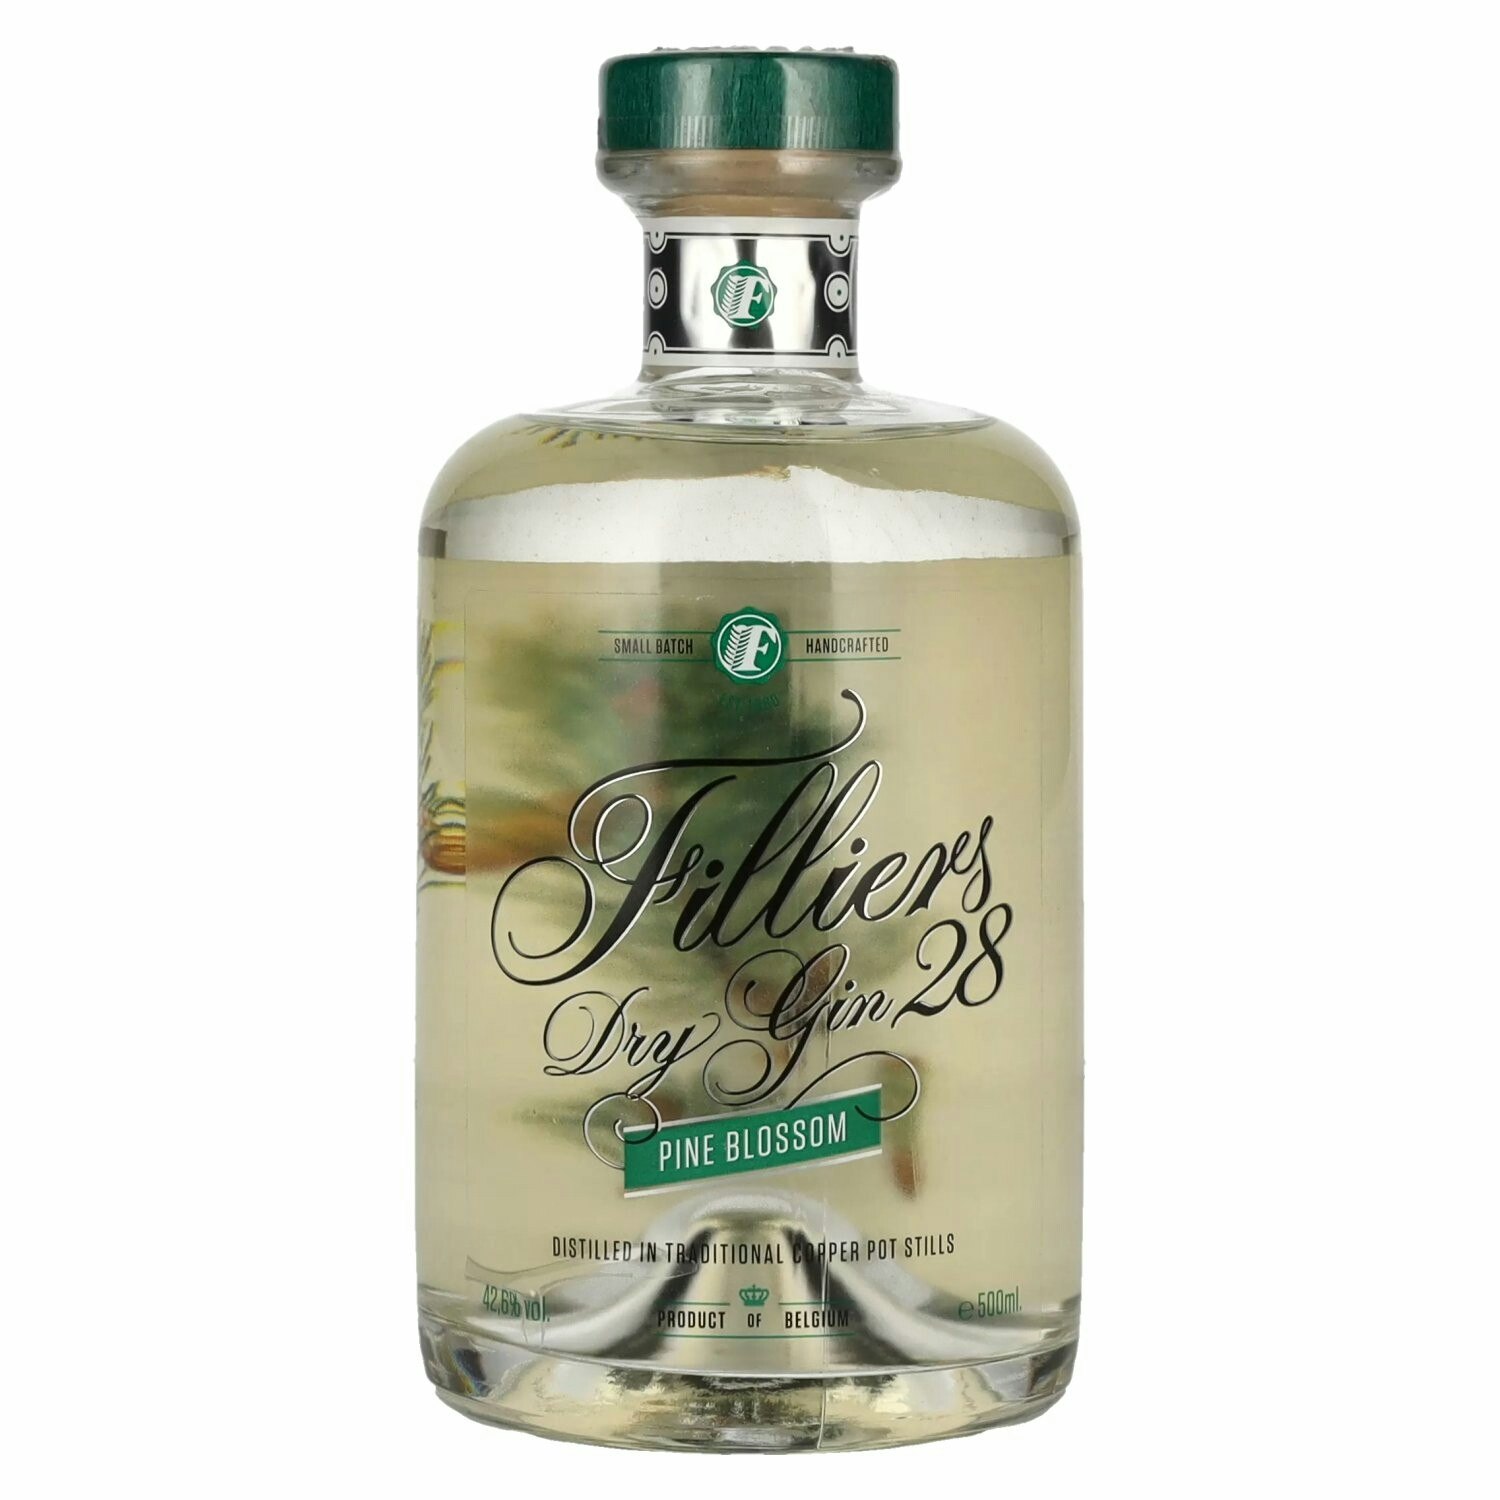 Filliers Dry Gin 28 PINE BLOSSOM 42,6% Vol. 0,5l